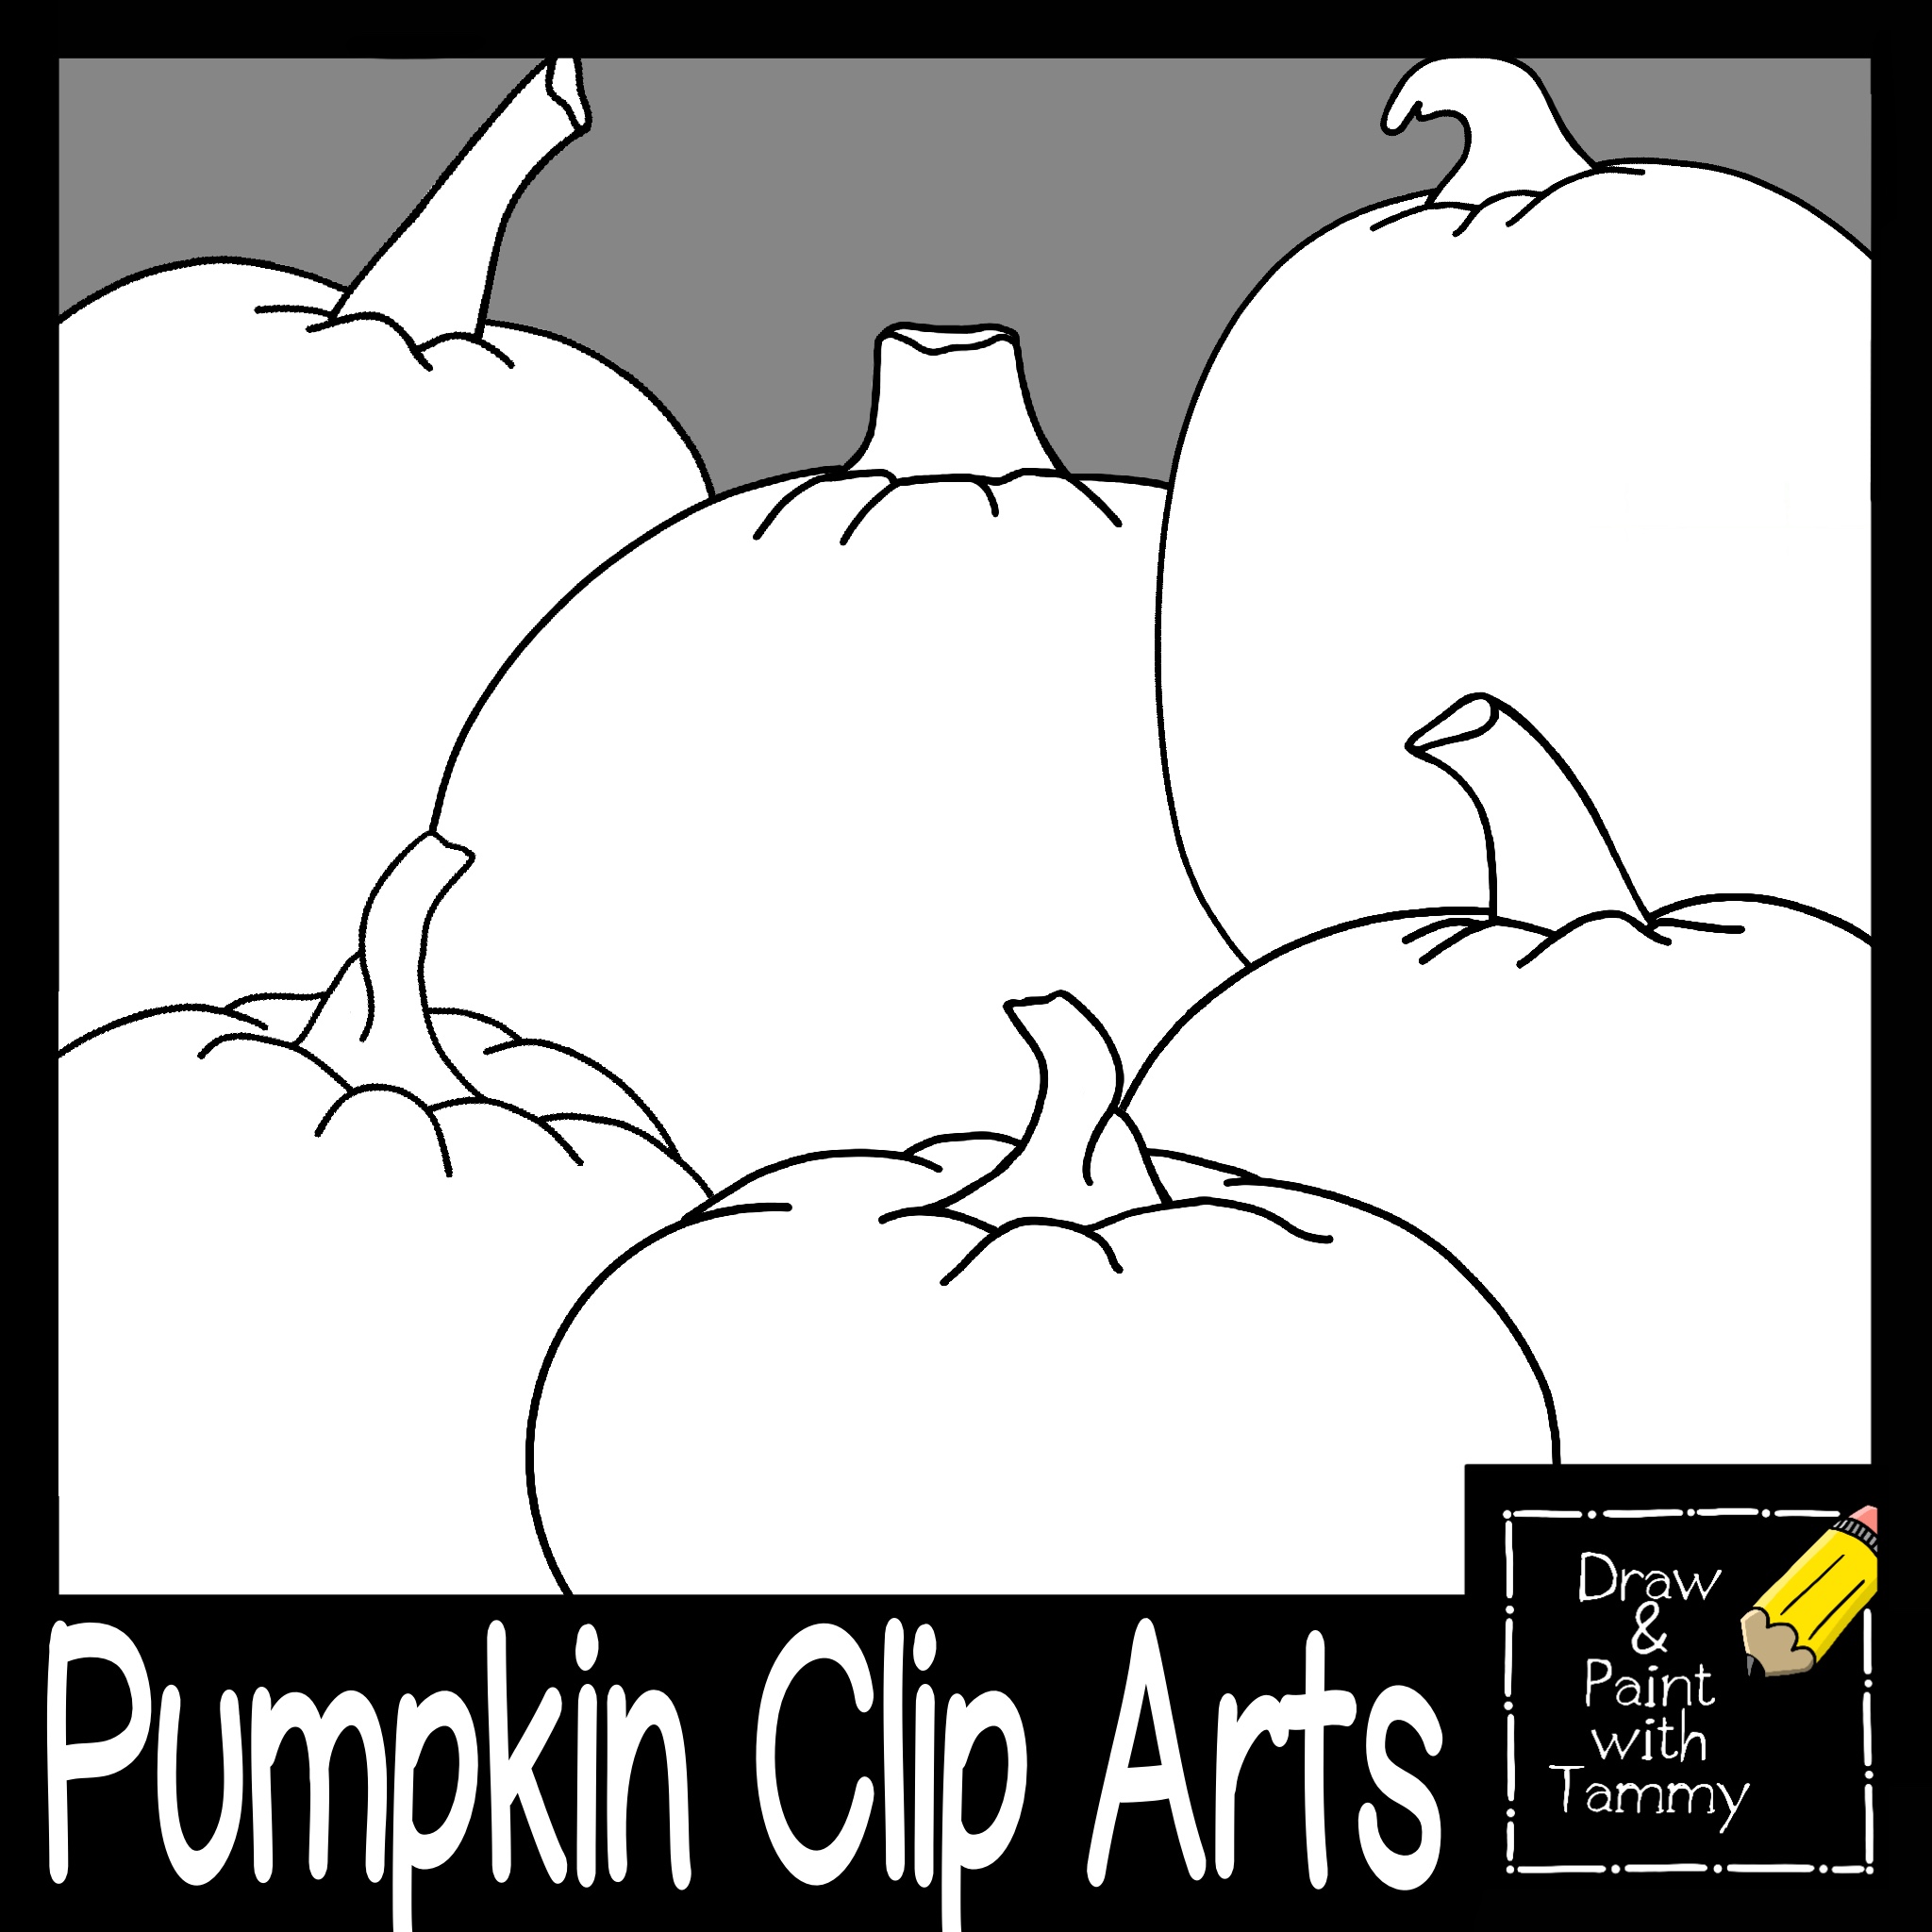 Pumpkin clip arts with solid colors farm house patterns for halloween and made by teachers